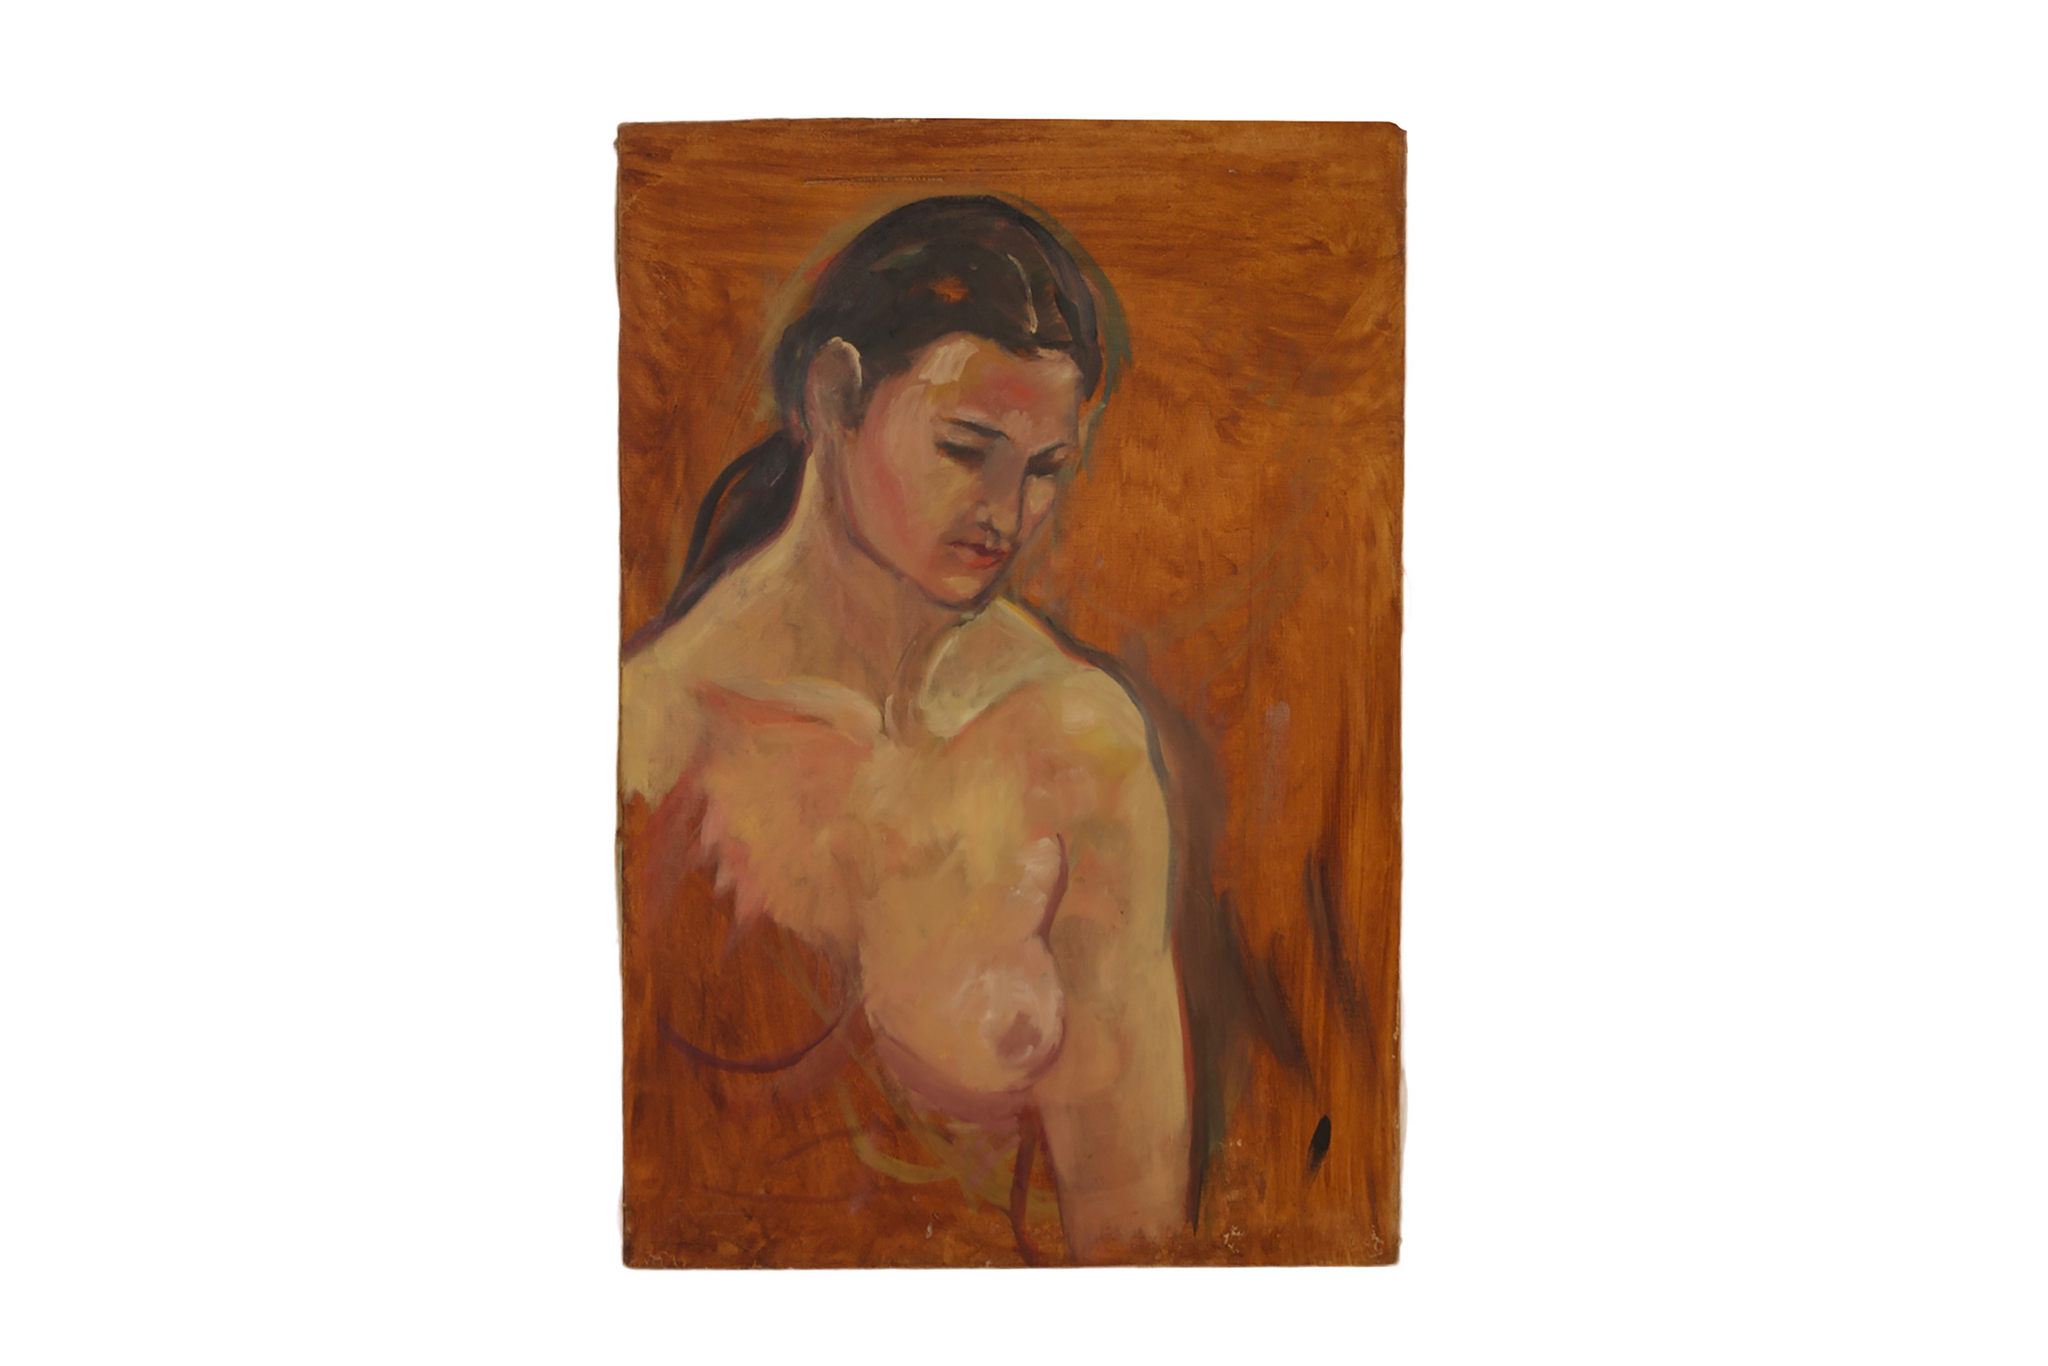 Nude Portrait of a Woman Original Artwork Outsider Art Oil Painting